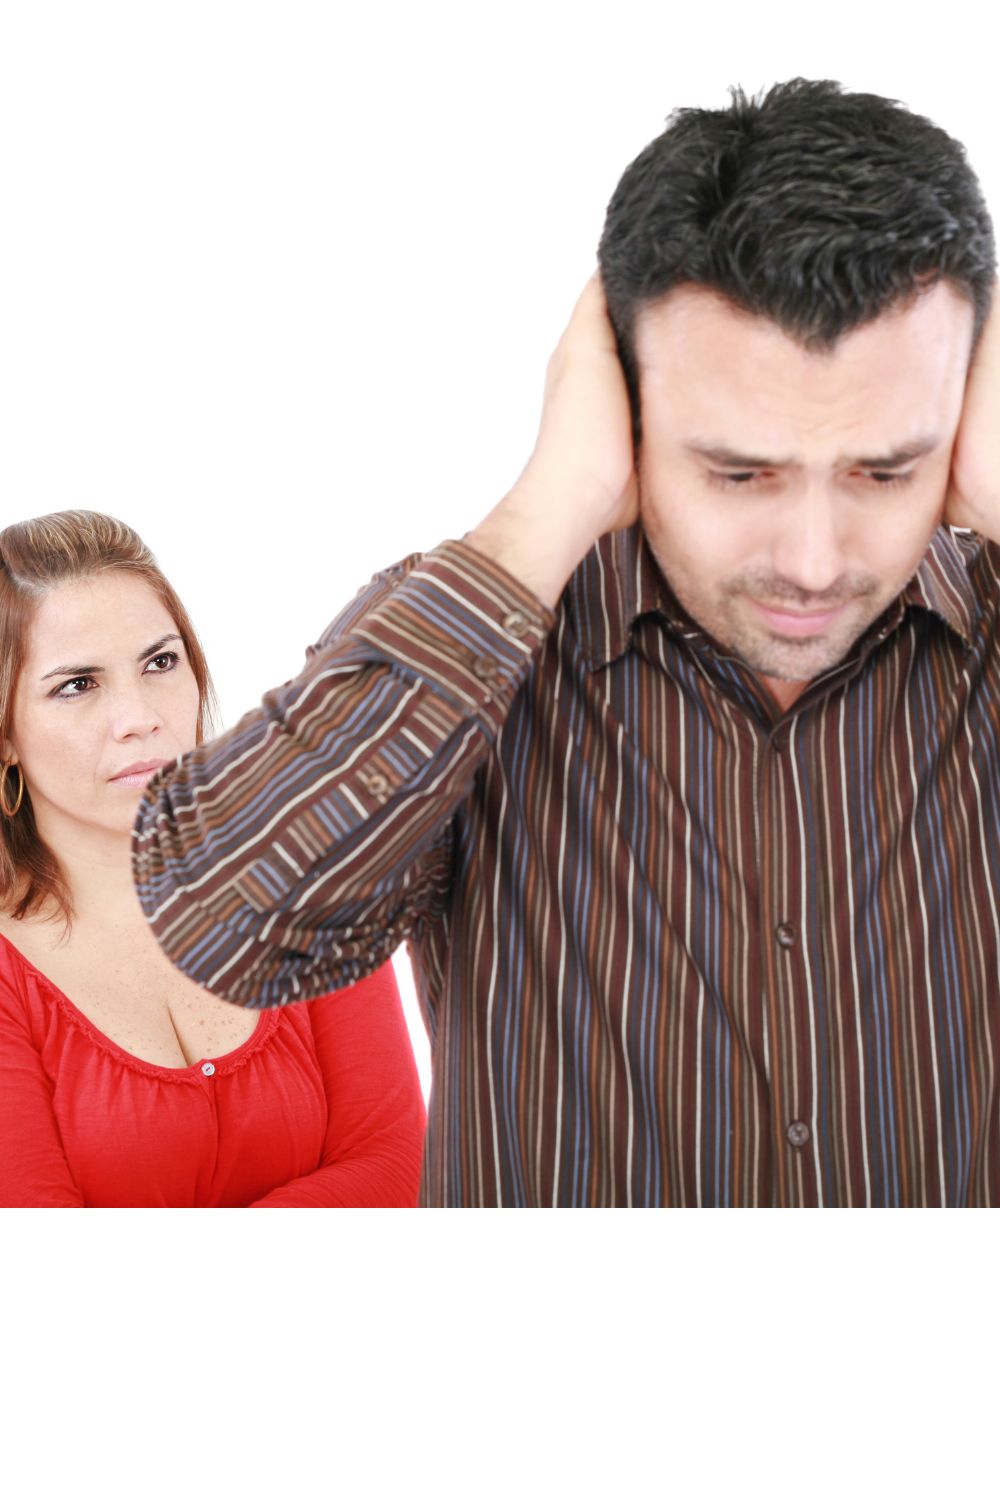 9 Signs Your Wife Hates You